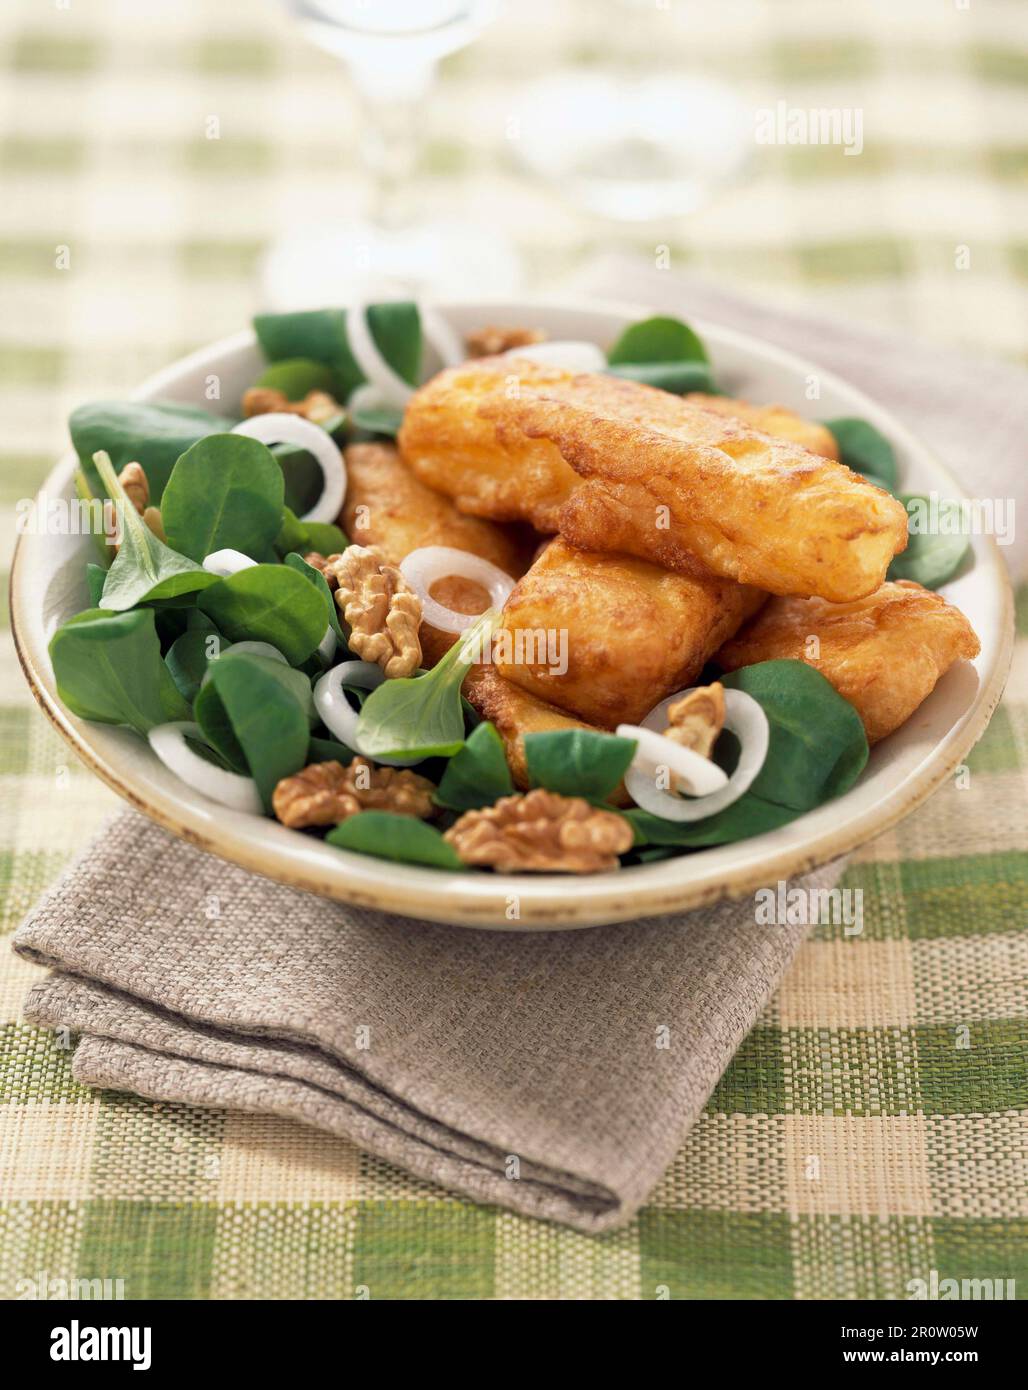 Maroilles fritters Stock Photo